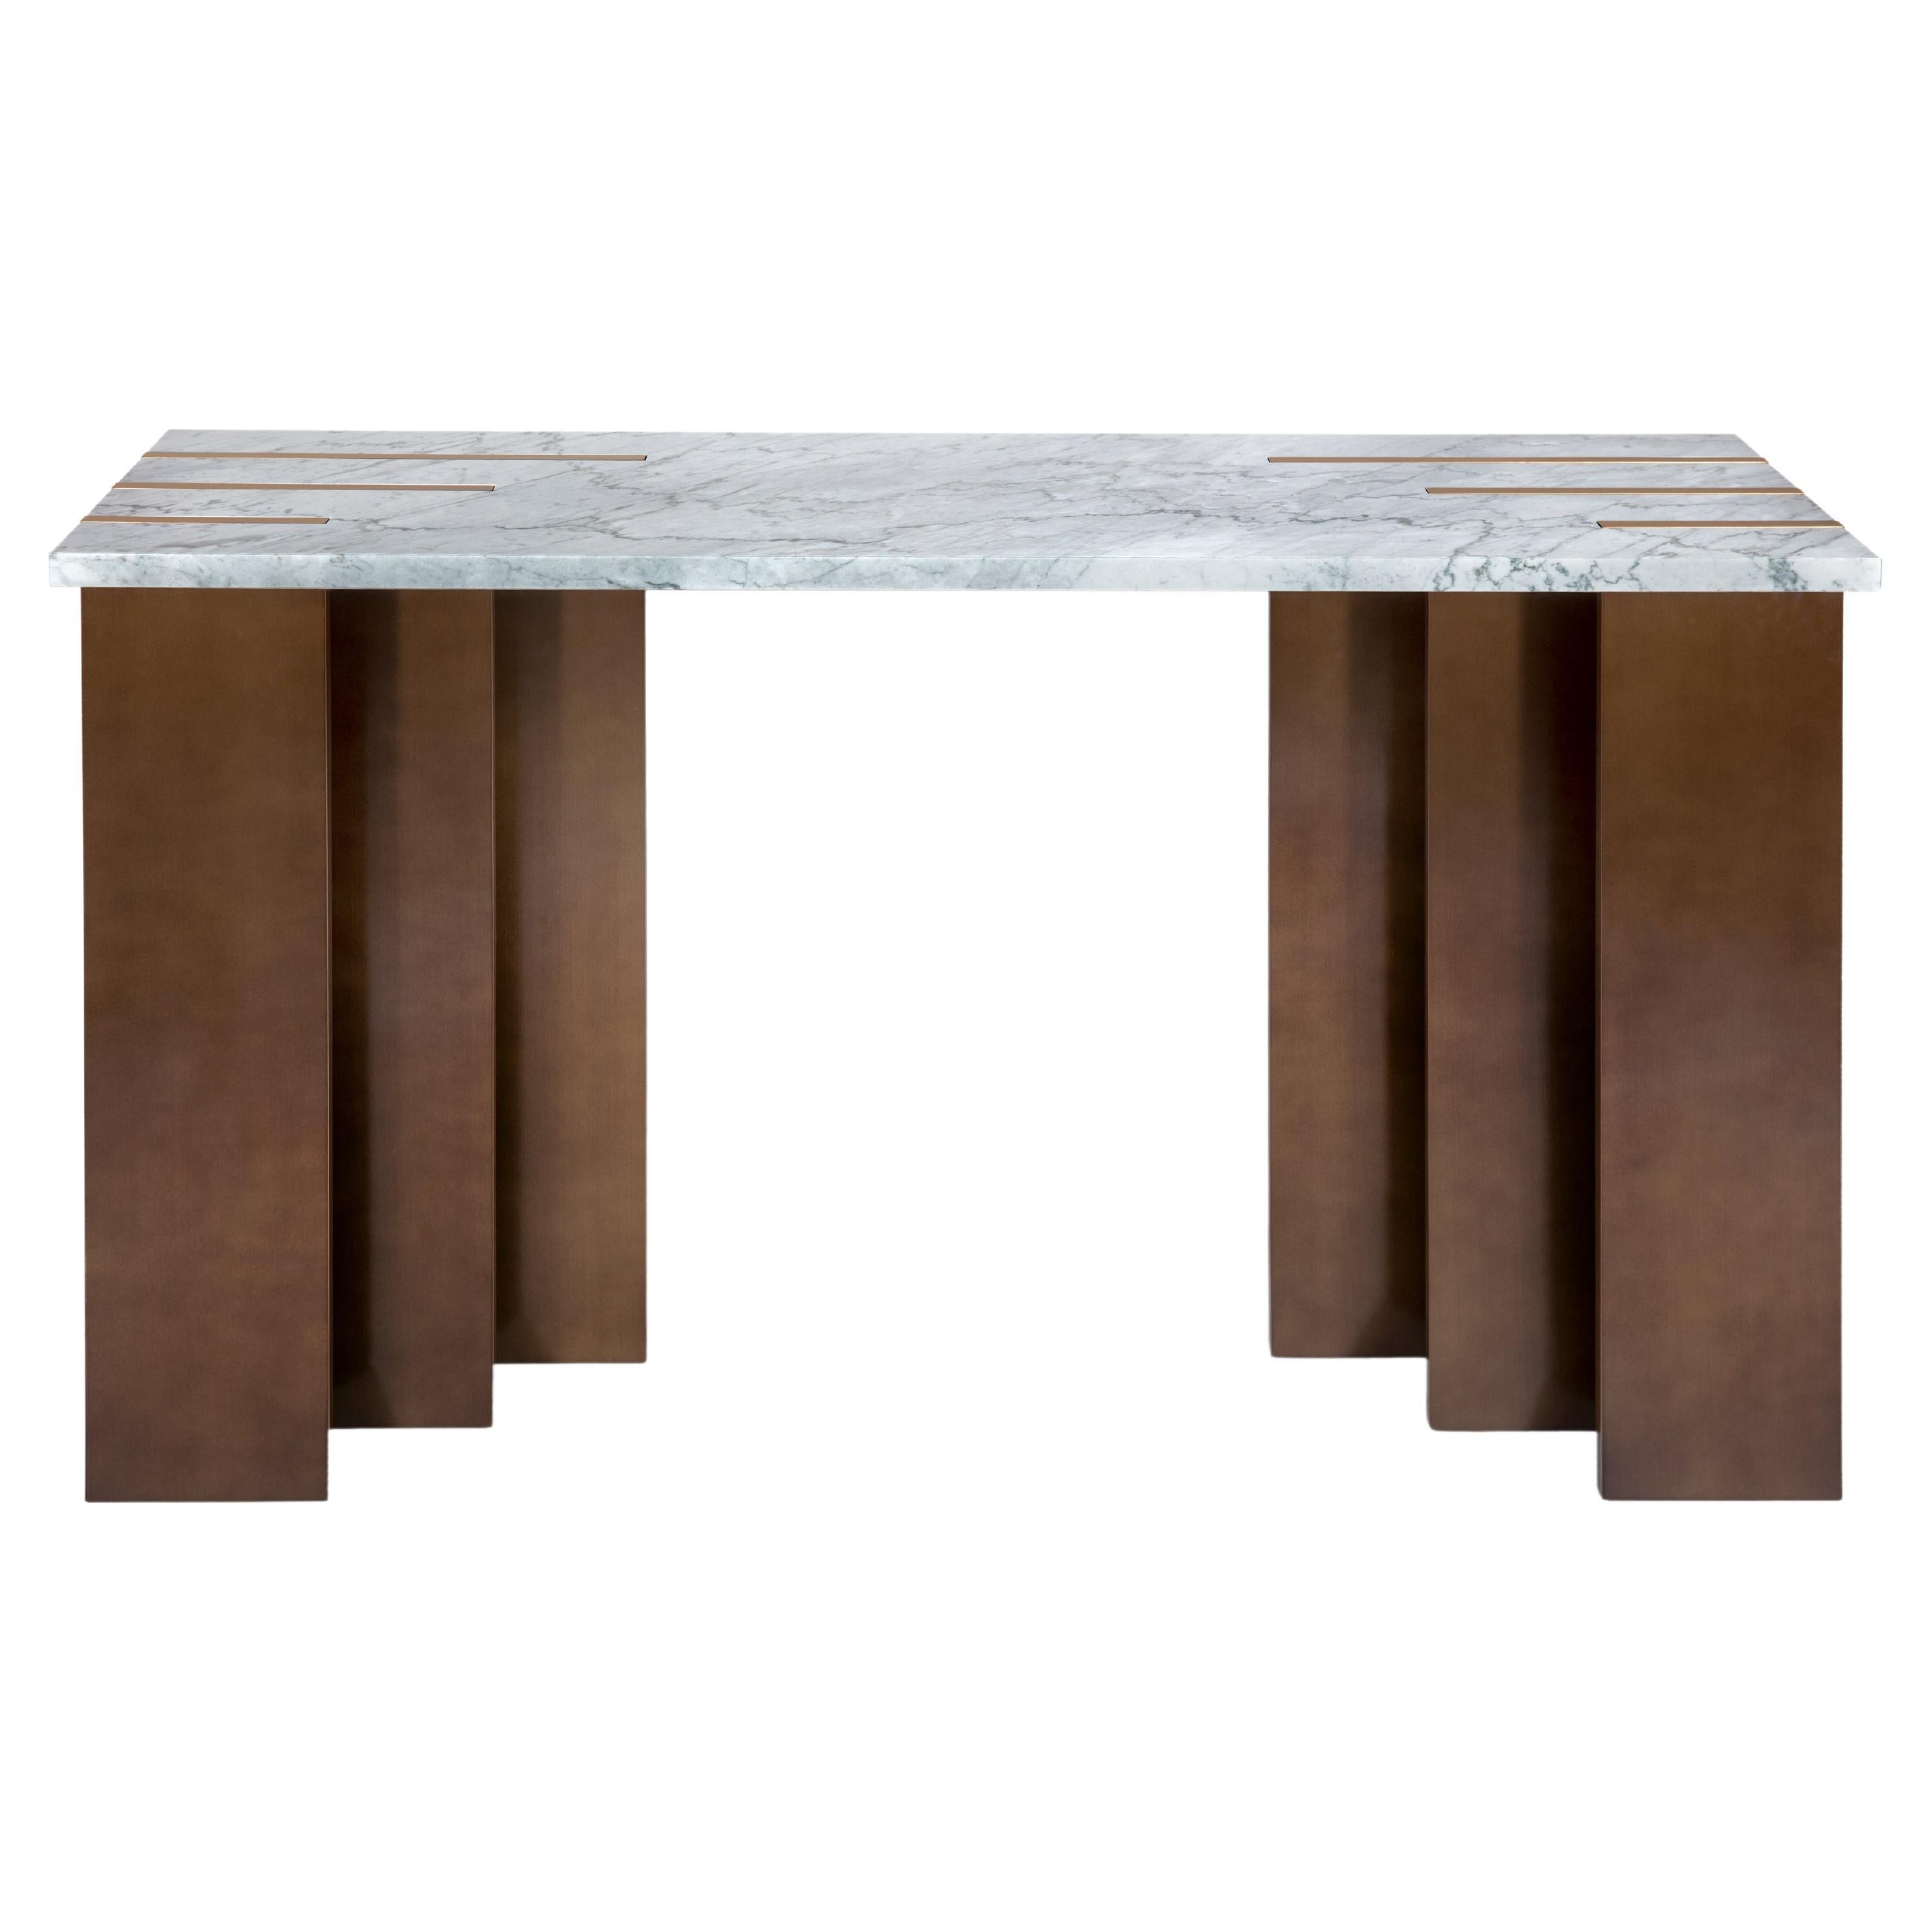 Pianist Carrara Marble Console by InsidherLand